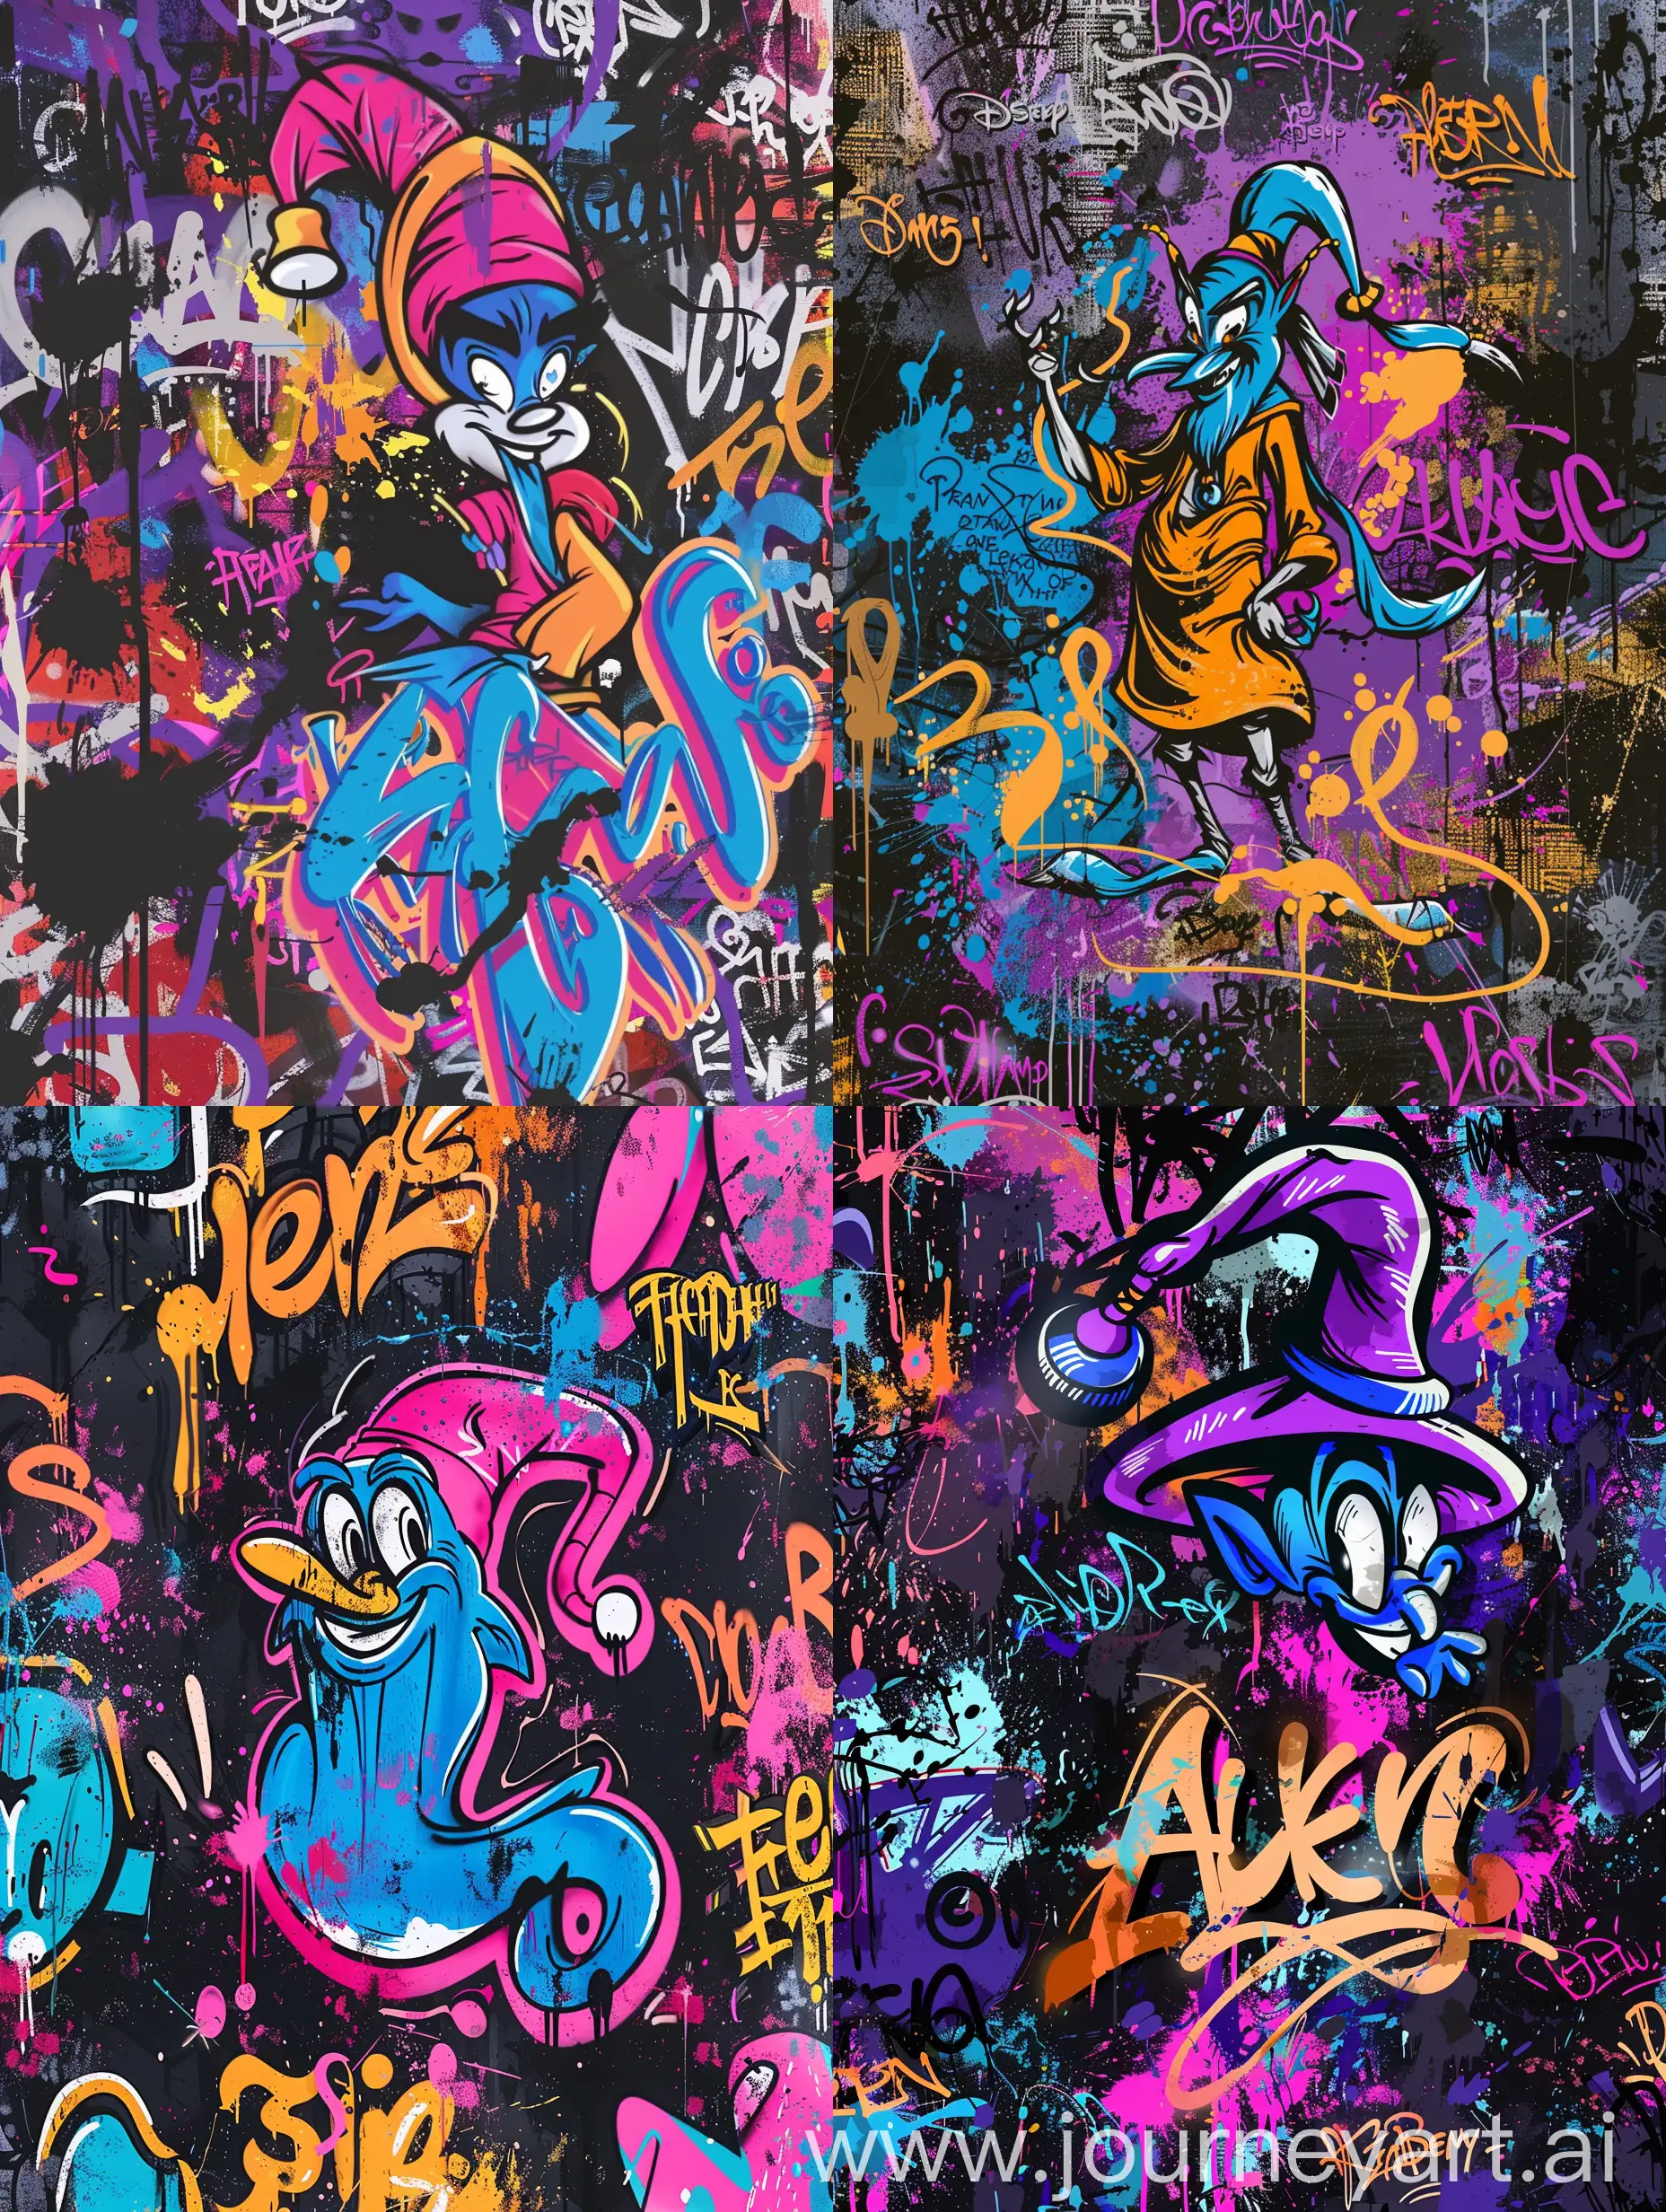 flat illustration graffiti on cava:2, fantasy illustration of the the genie from aladdin by disney, detailed, tag, background full of dark paint splash and graffiti text, random sized graffiti text all over typography:2, urban, canva texture, text 